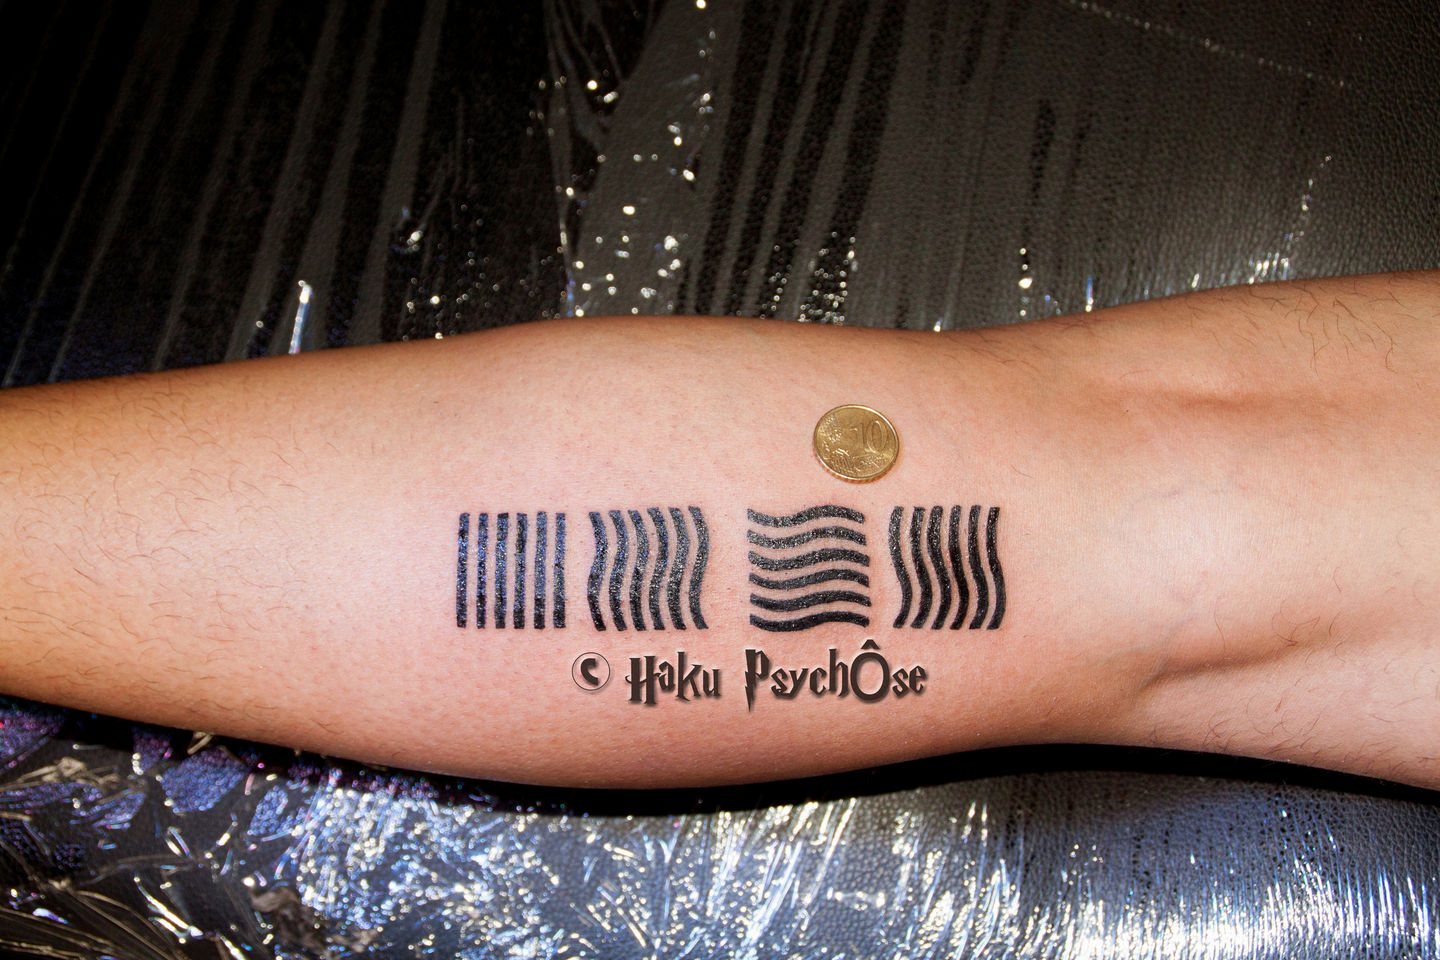 Your Tribal Tattoo Guide With 110 Inspirations | Bored Panda